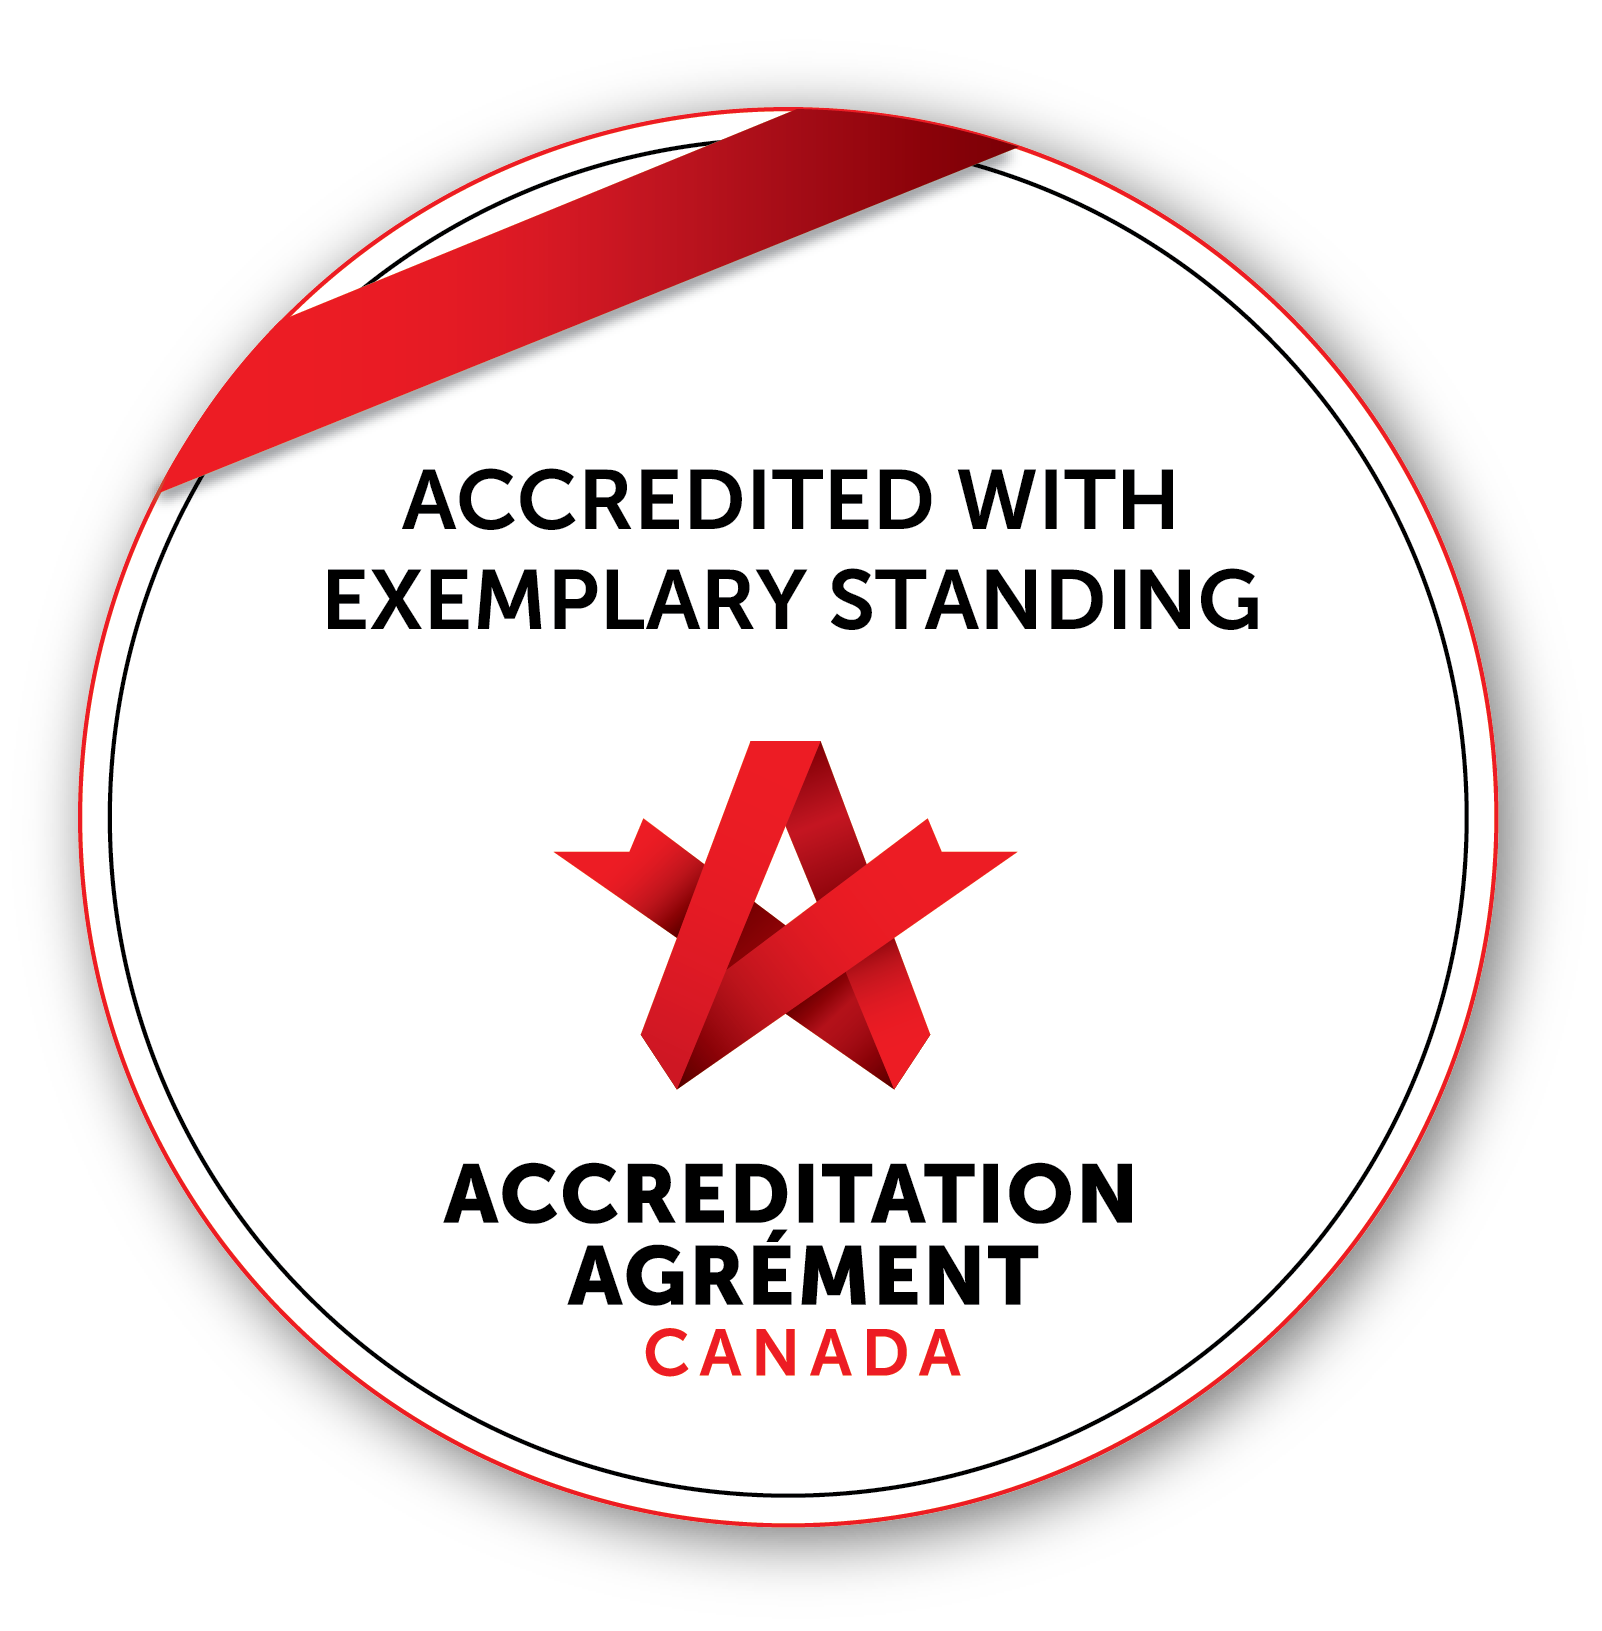 Accredited with Exemplary Standing - Accreditation Canada